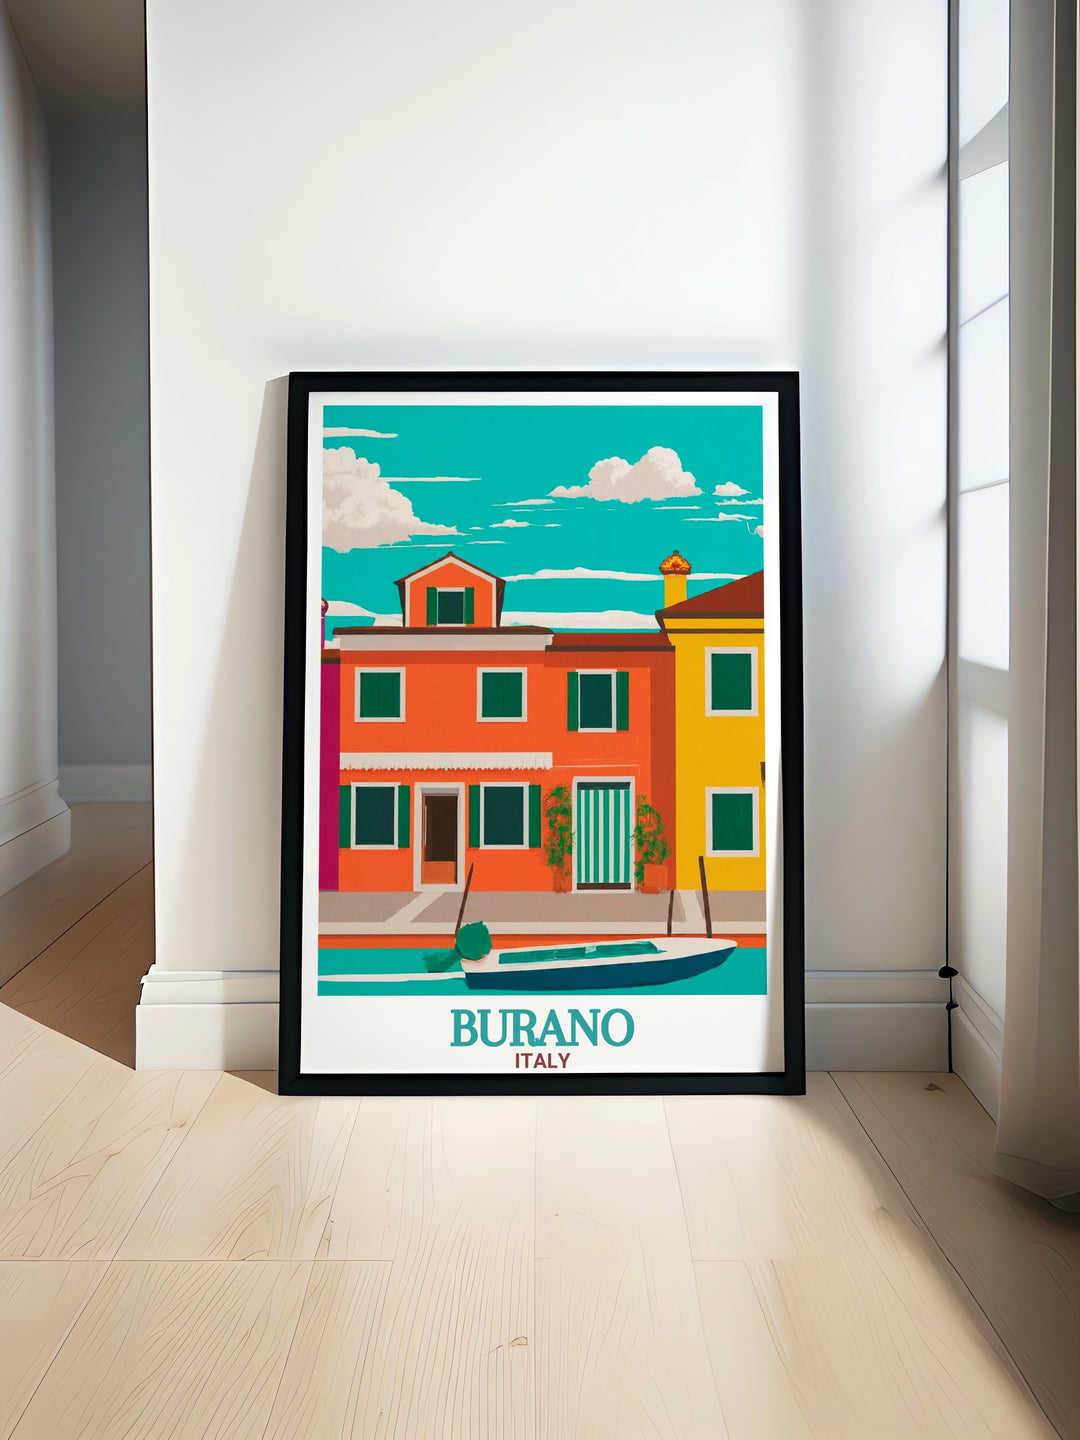 Burano Cityscape with vibrant colorful houses reflecting in the serene canals. This Burano poster is perfect for adding a touch of Italian charm to your home decor. Ideal for those who appreciate Colorful Houses and picturesque skylines.